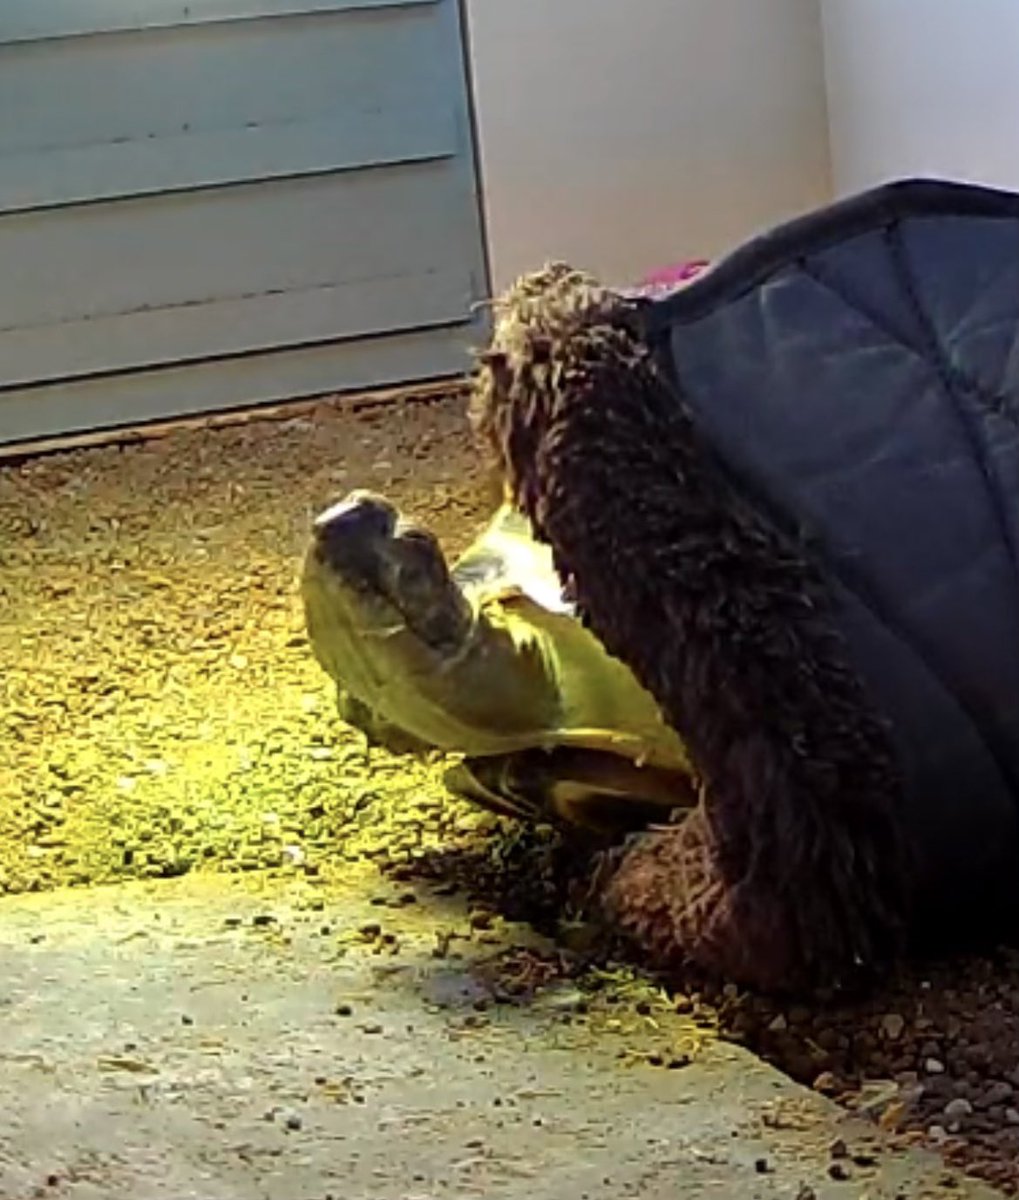 Albie cam caught me doing my #SaturdayStretches - got to keep in shape to reach for those dandies! 🤣🐢💚🧘